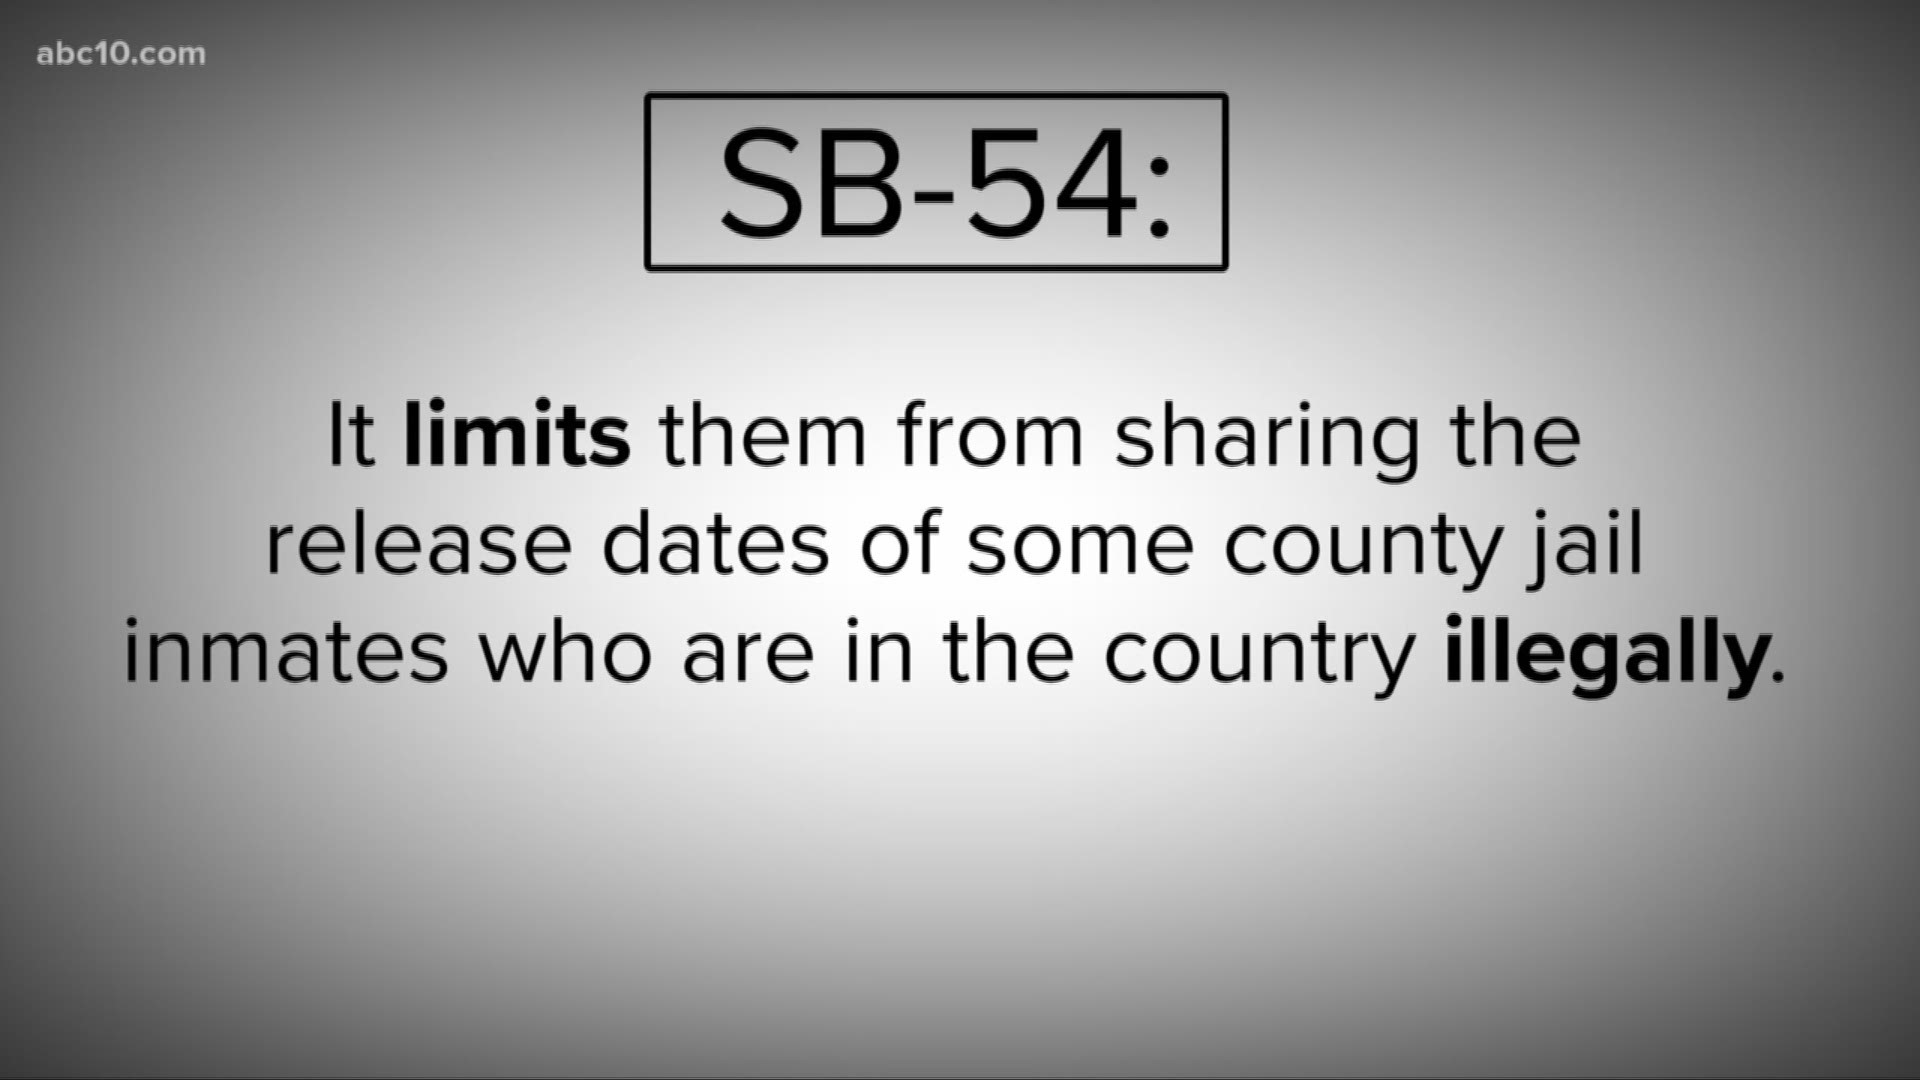 Senate Bill 54 is known as the California Values Act or the "Sanctuary State" bill. It impacts law enforcement and, according to the United States Department of Justice, allegedly interferes with the ability of federal immigration authorities to carry out their jobs.